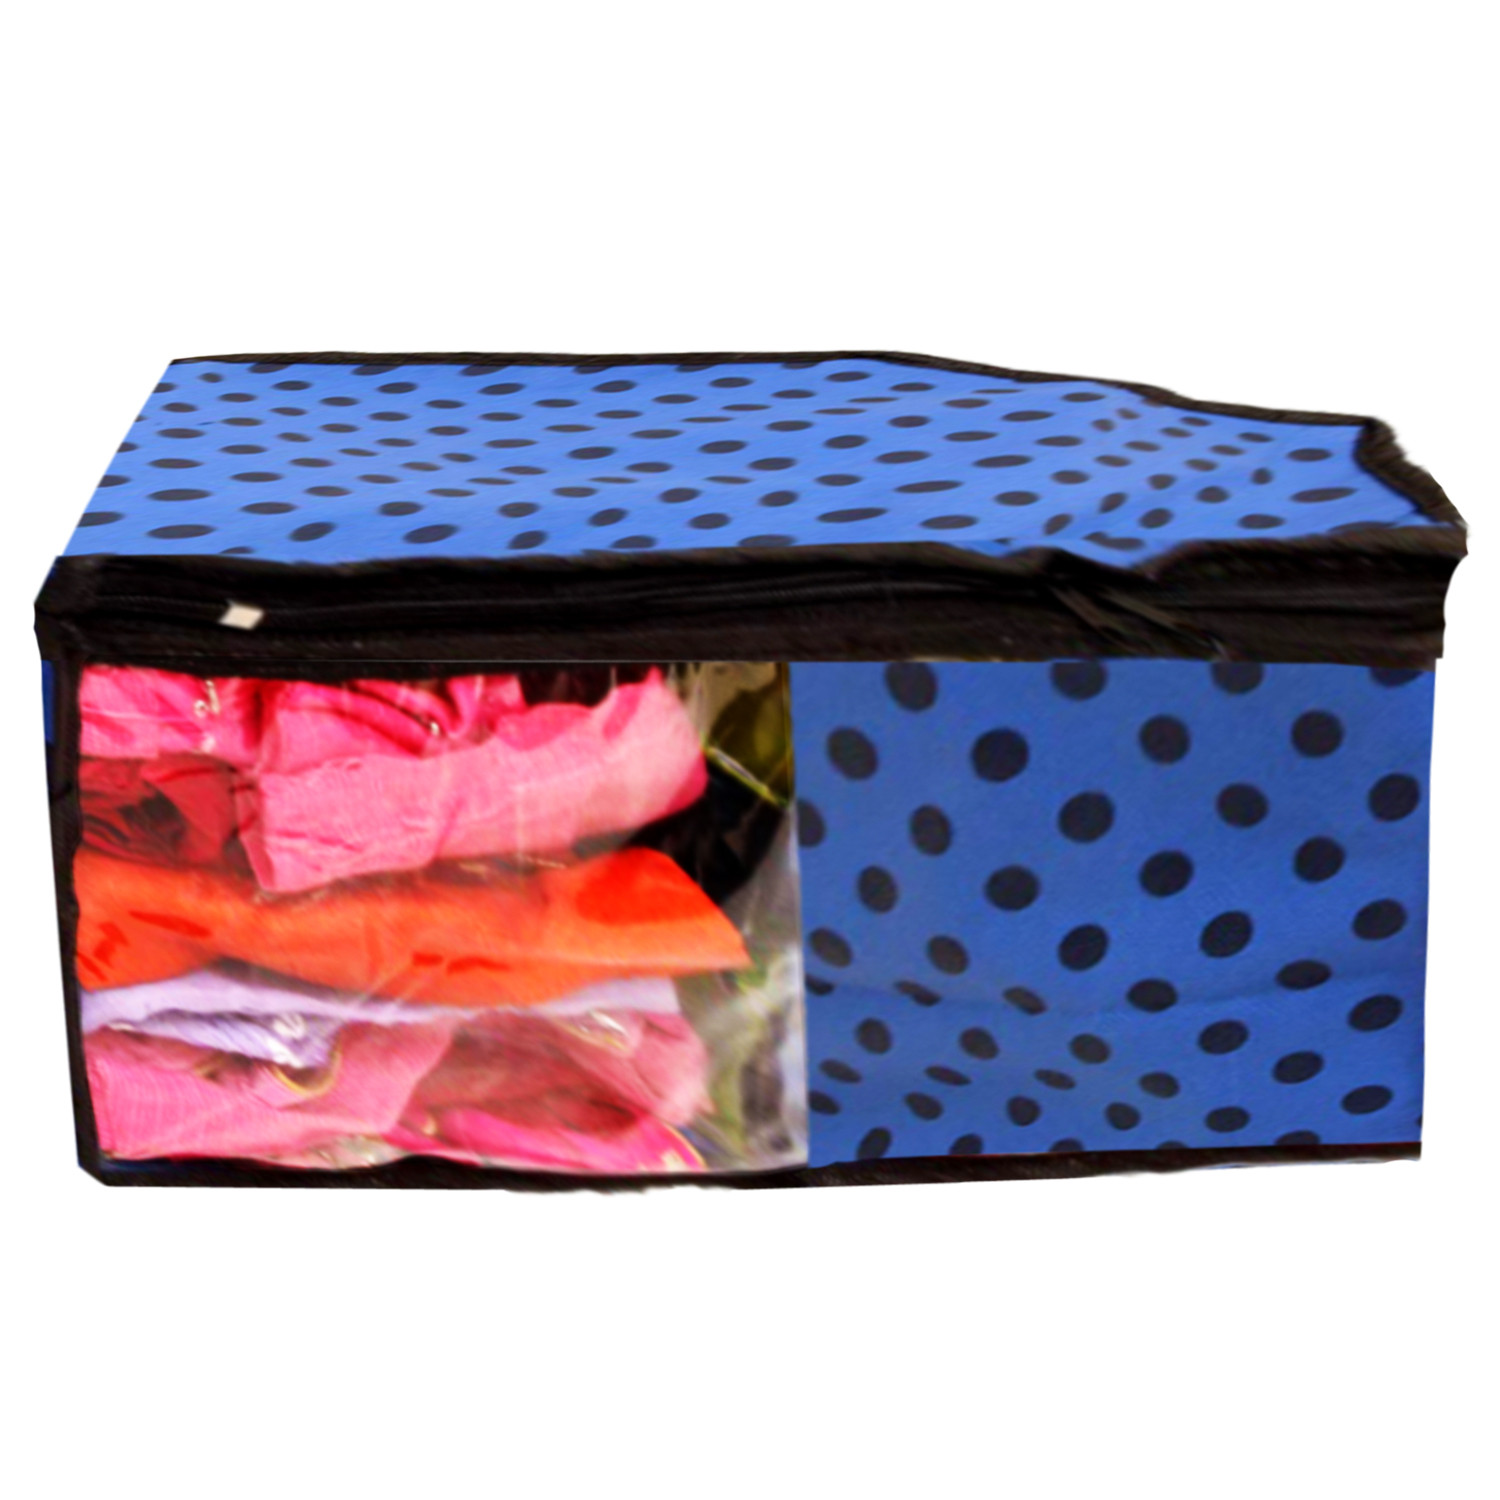 Kuber Industries Polka Dots Design Non Woven Saree Cover/Cloth Wardrobe Organizer And Blouse Cover Combo Set (Blue) -CTKTC38427